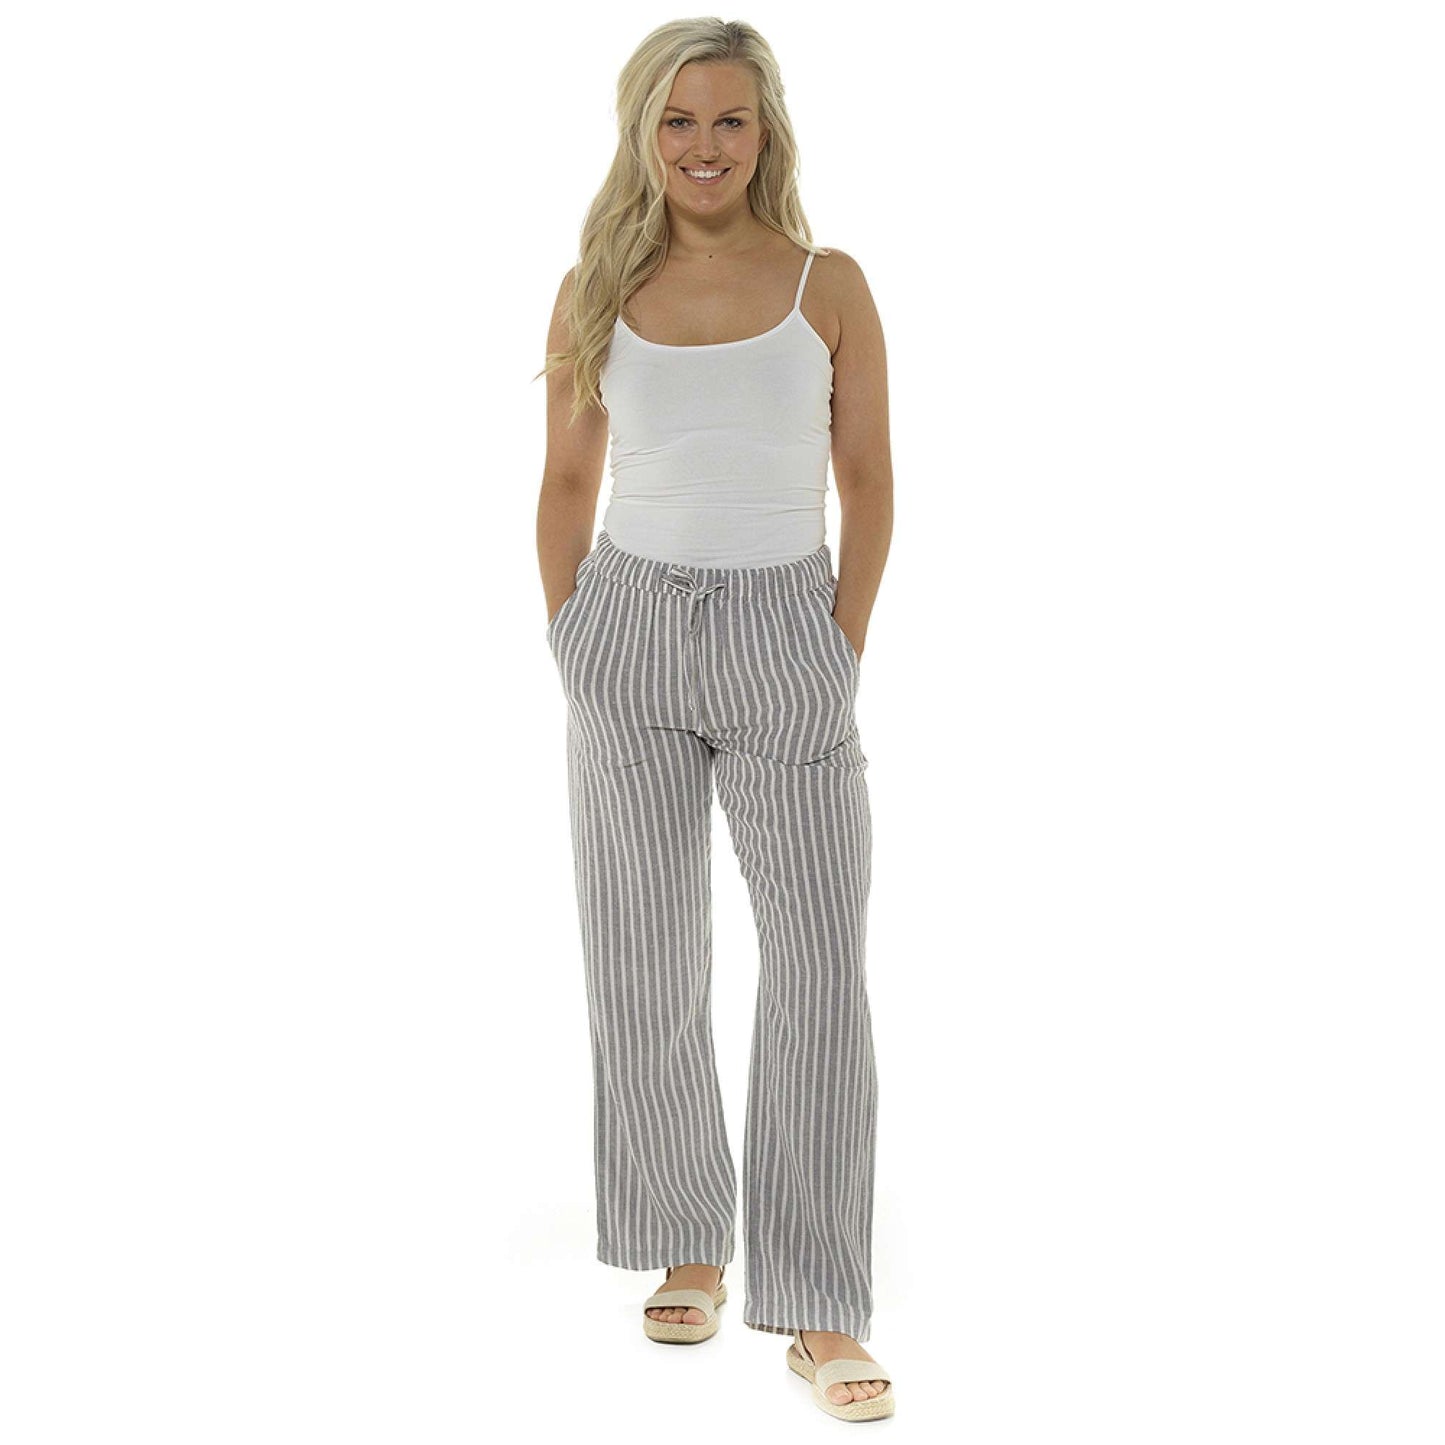 Ladies Classic Linen Trousers with Elasticated Waist and Pockets Casual Summer